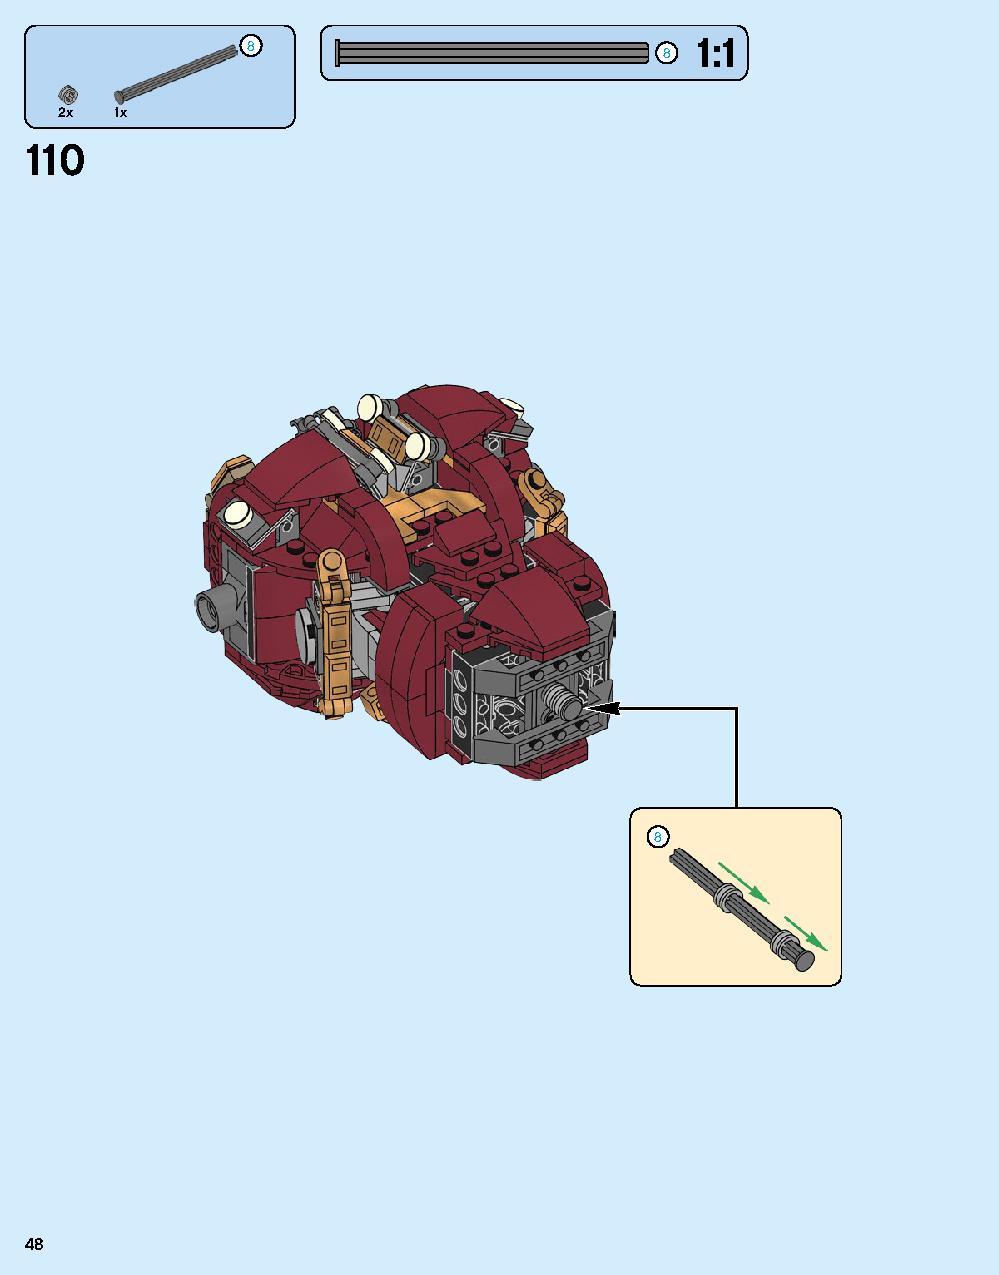 The Hulkbuster: Ultron Edition 76105 LEGO information LEGO instructions 48 page